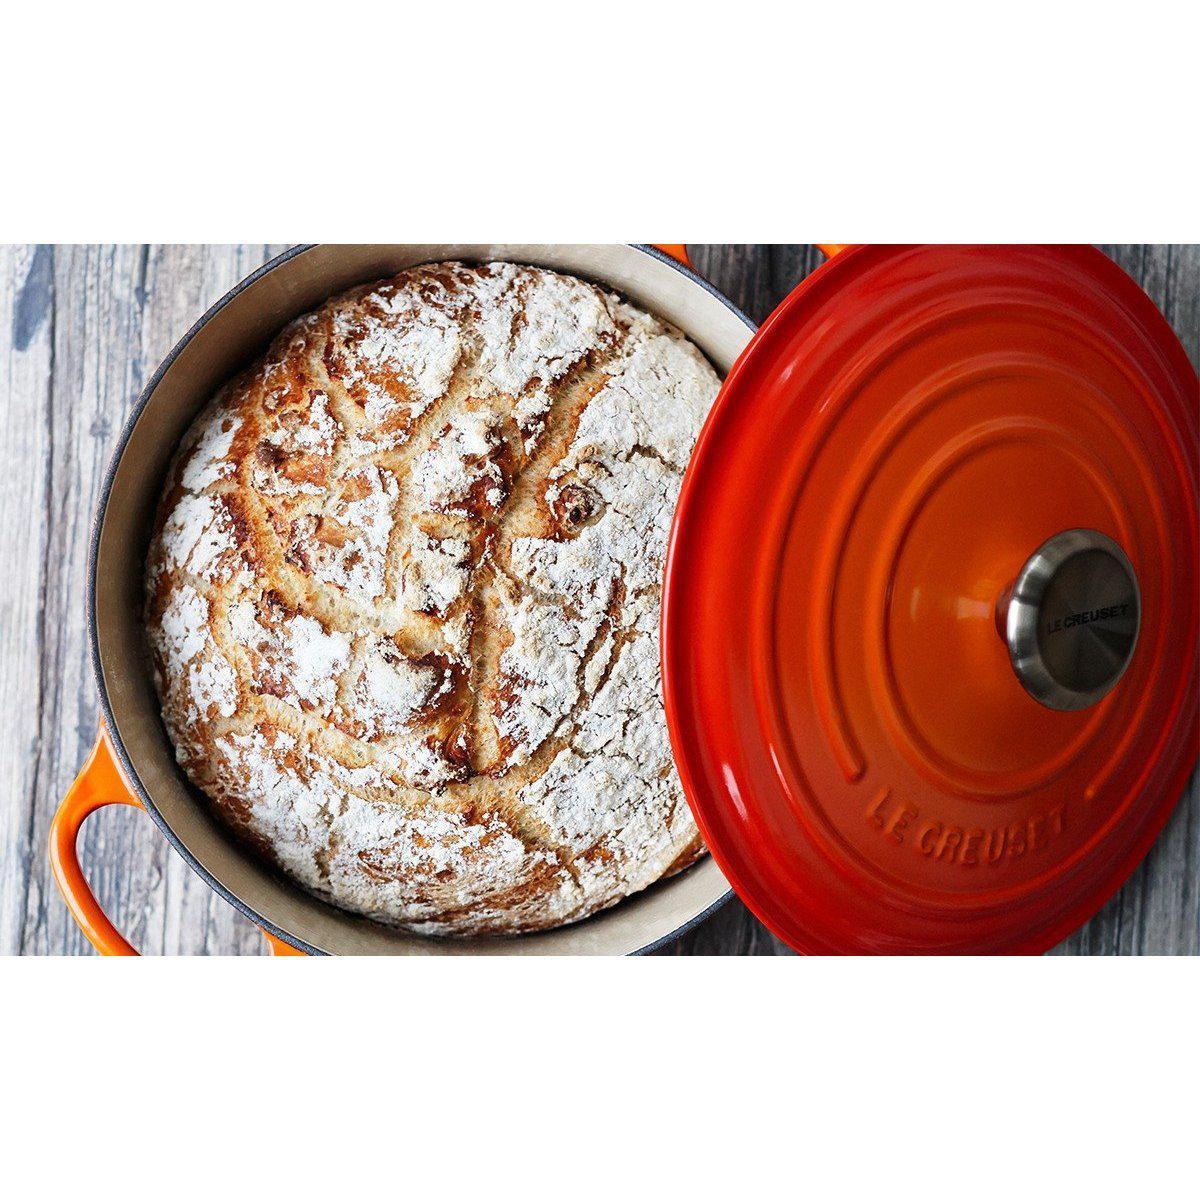 Interior Le Creuset Enamel Coated Flame 5.3L French Dutch Oven 26 cm Canada